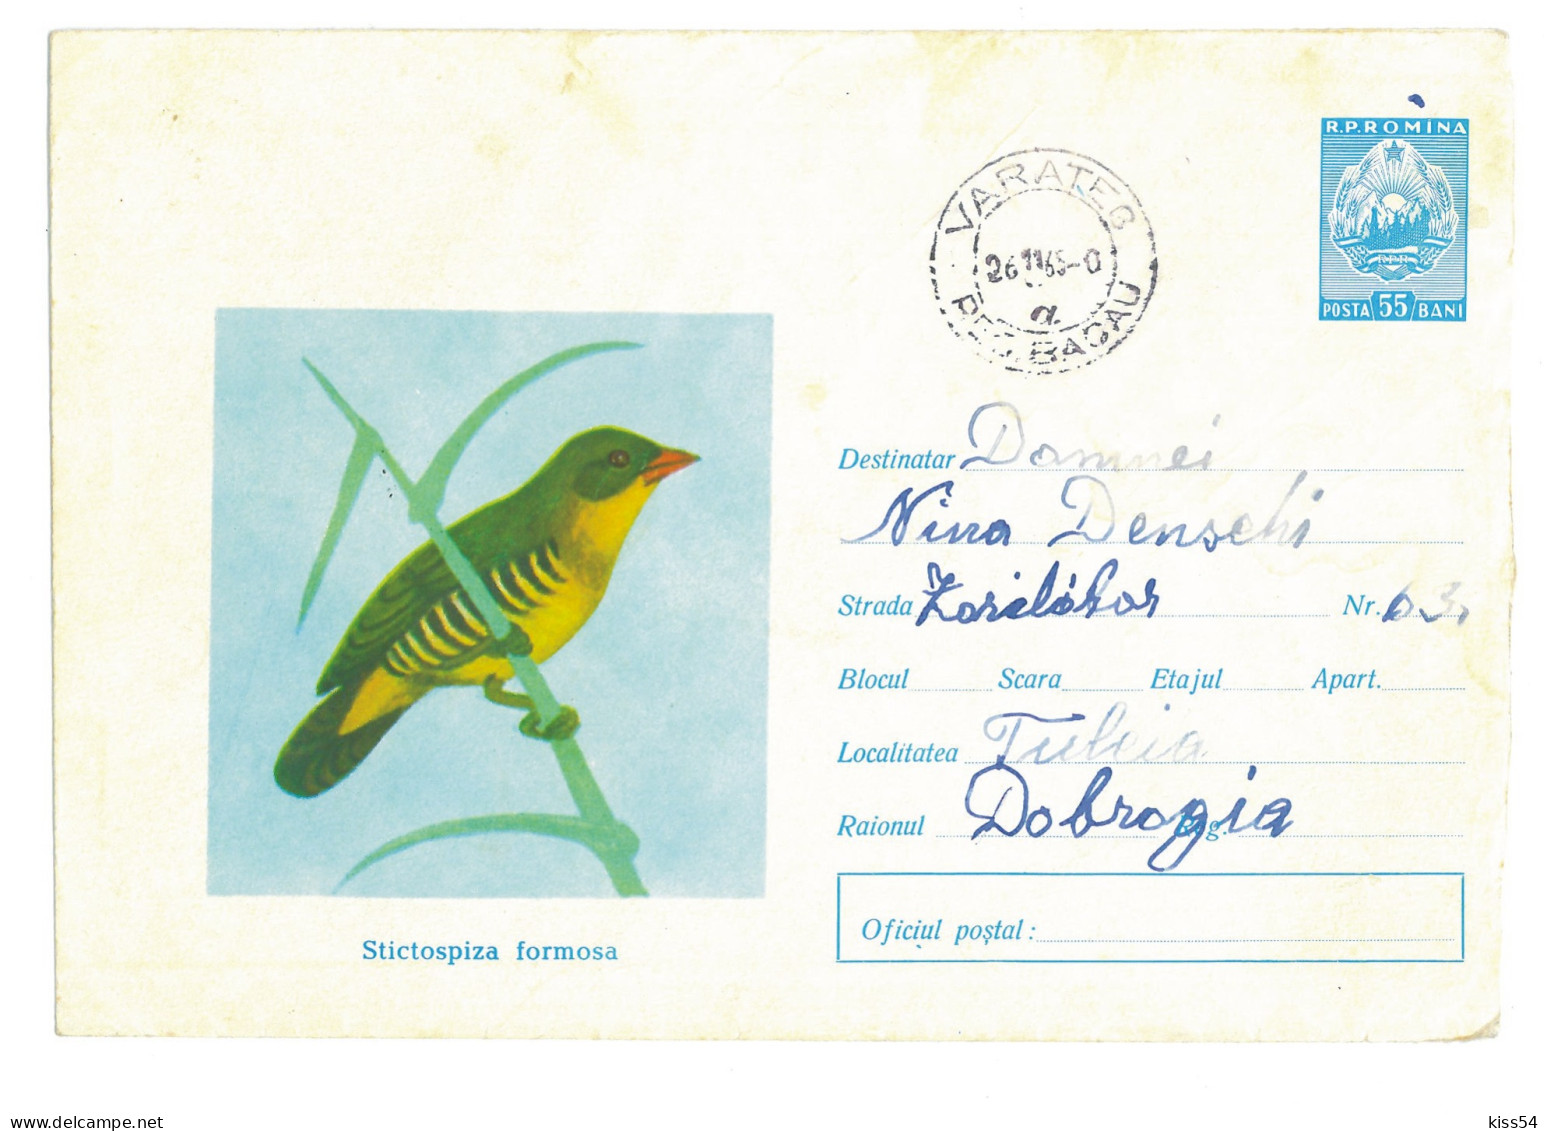 IP 65 A - 0181a BIRD, Romania - Stationery - Used - 1965 - Entiers Postaux